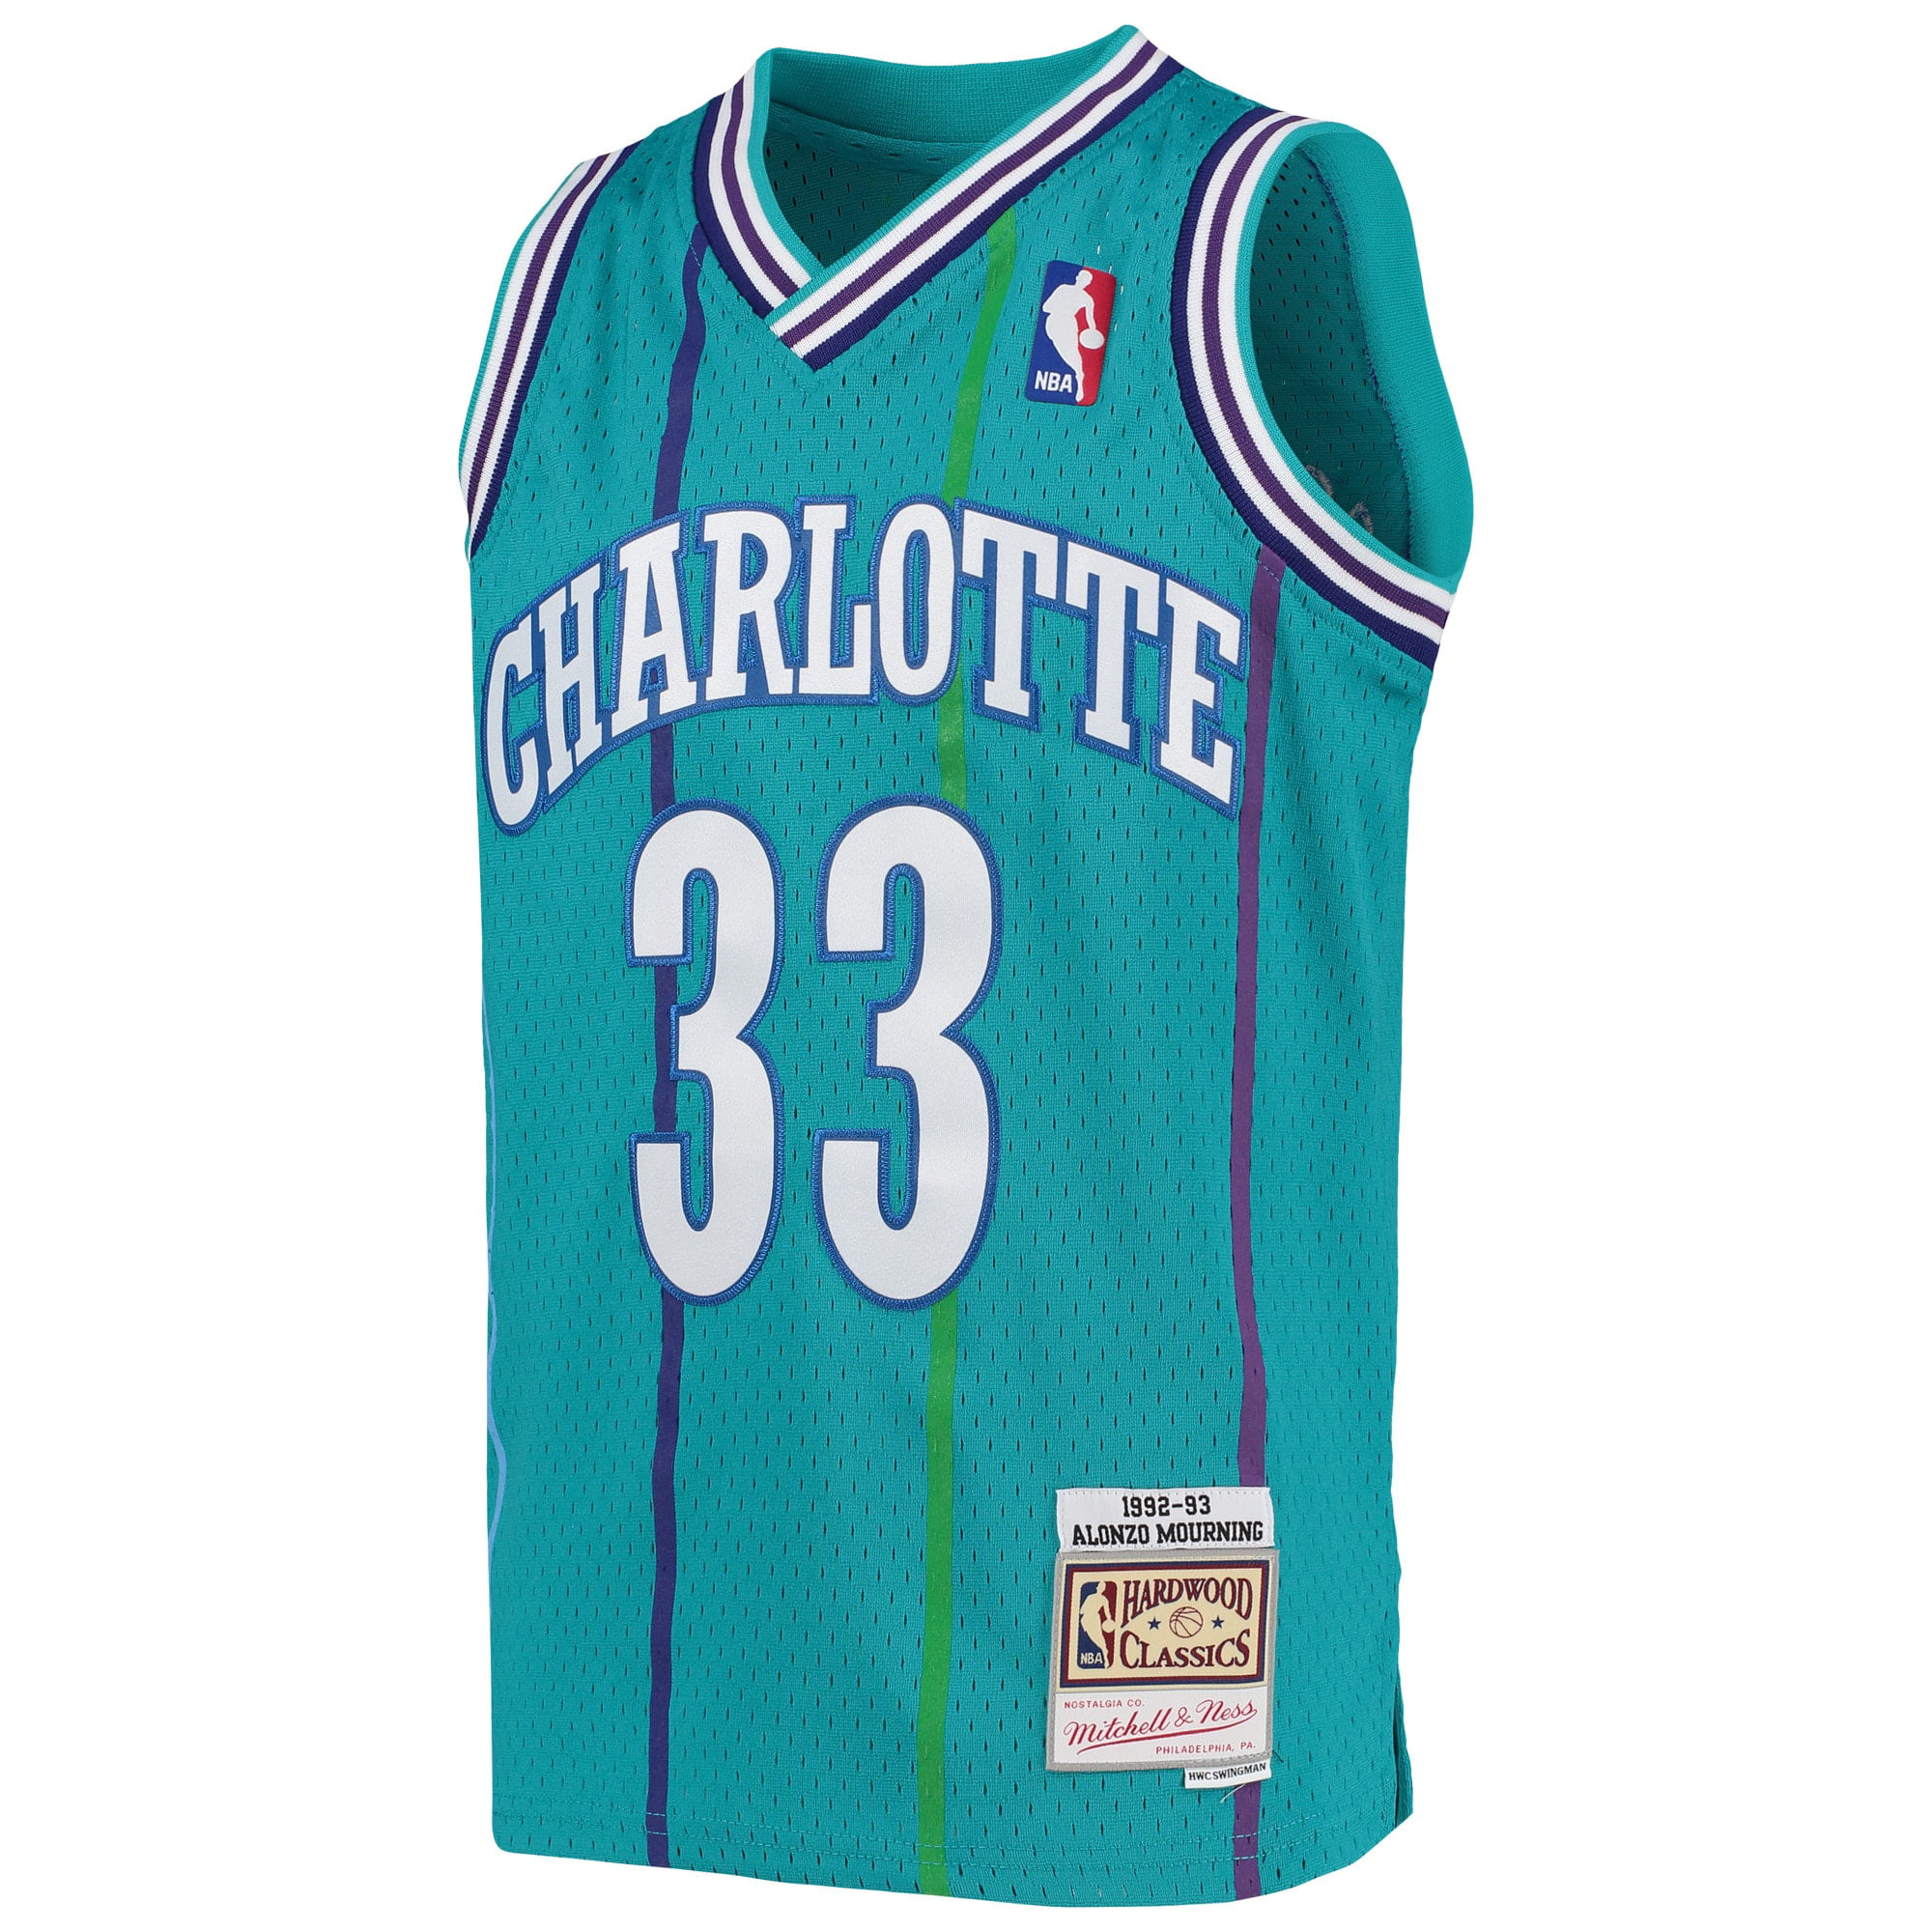 Mitchell & Ness Men's Mitchell & Ness Alonzo Mourning Teal